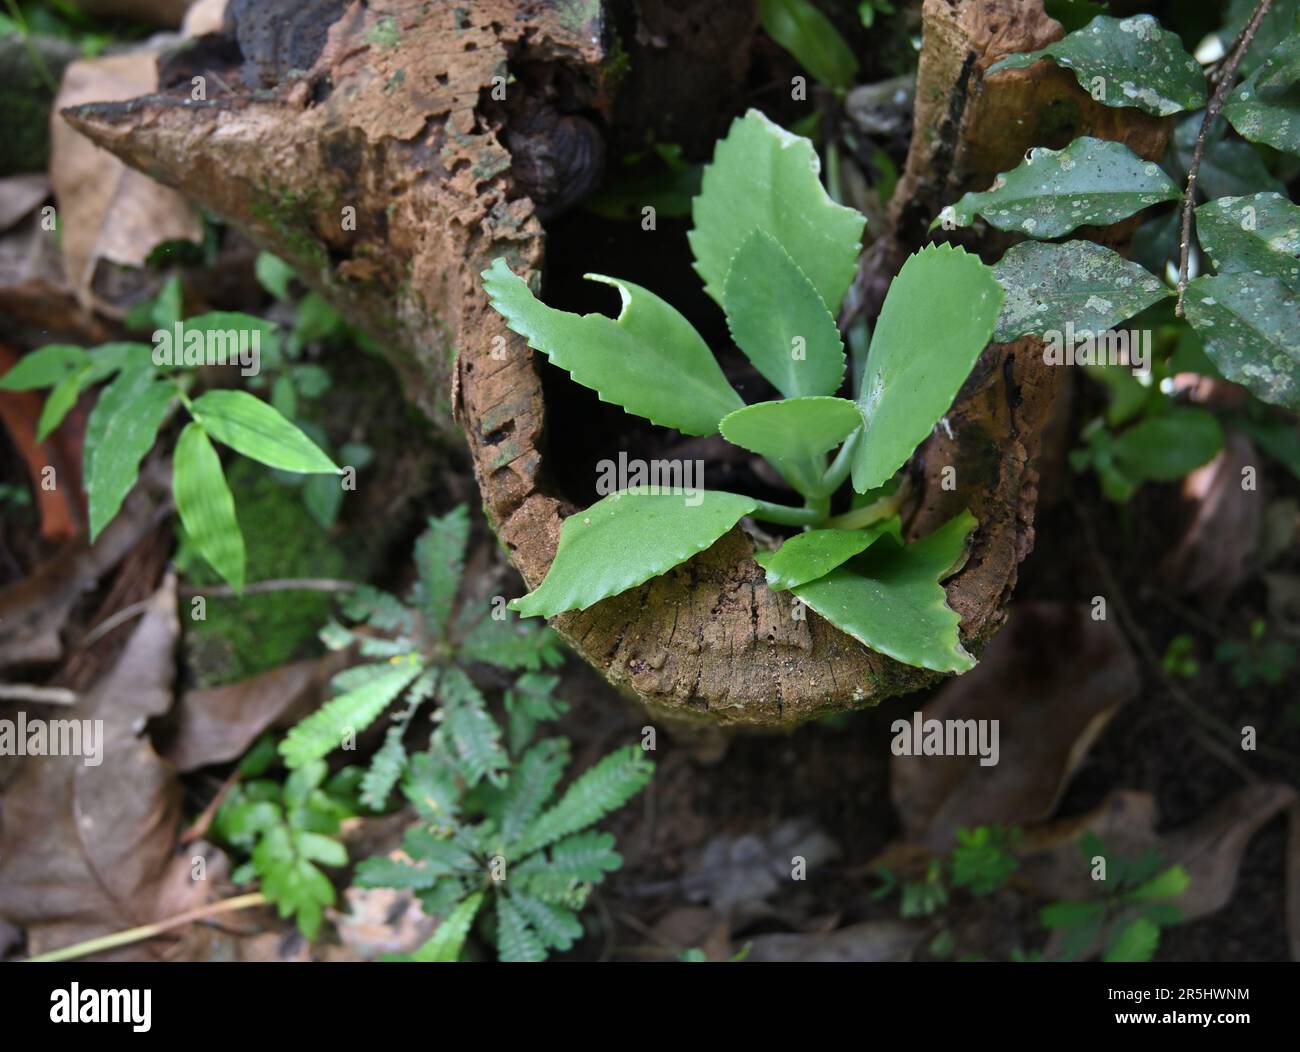 A small Life plant (Kalanchoe Pinnata) growing inside of a decaying old wood hole in the home garden Stock Photo